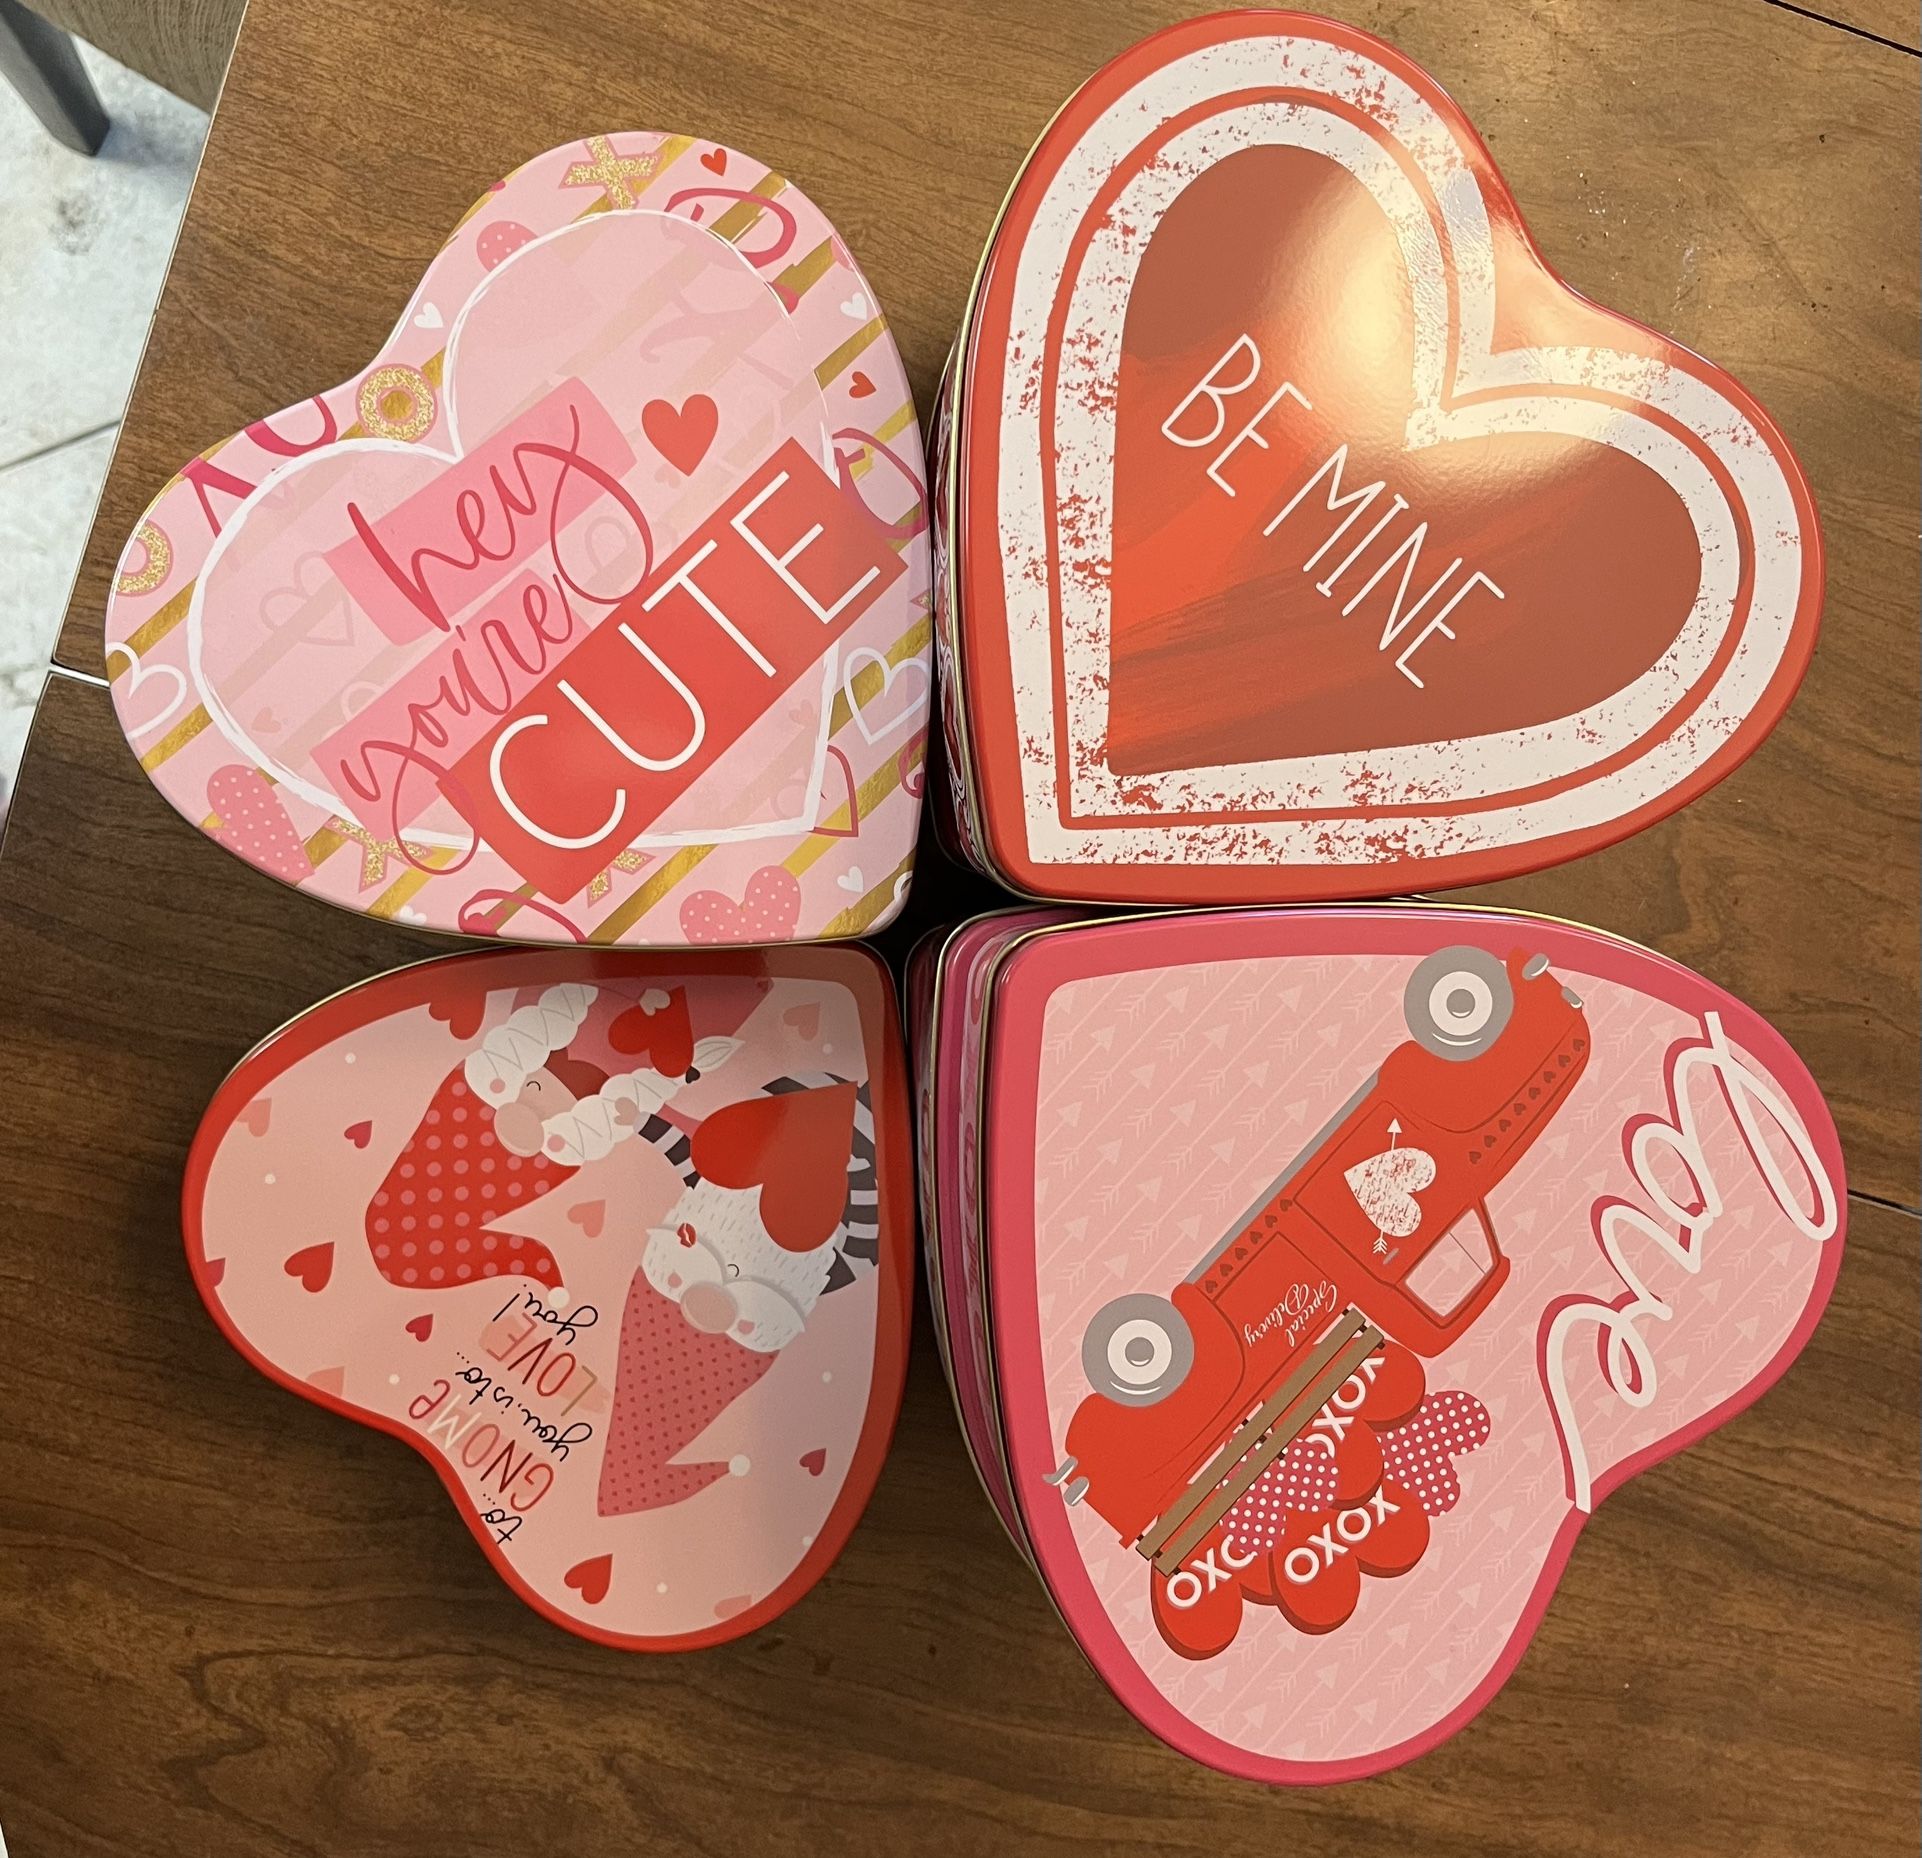 Valentine’s Tins and Boxes